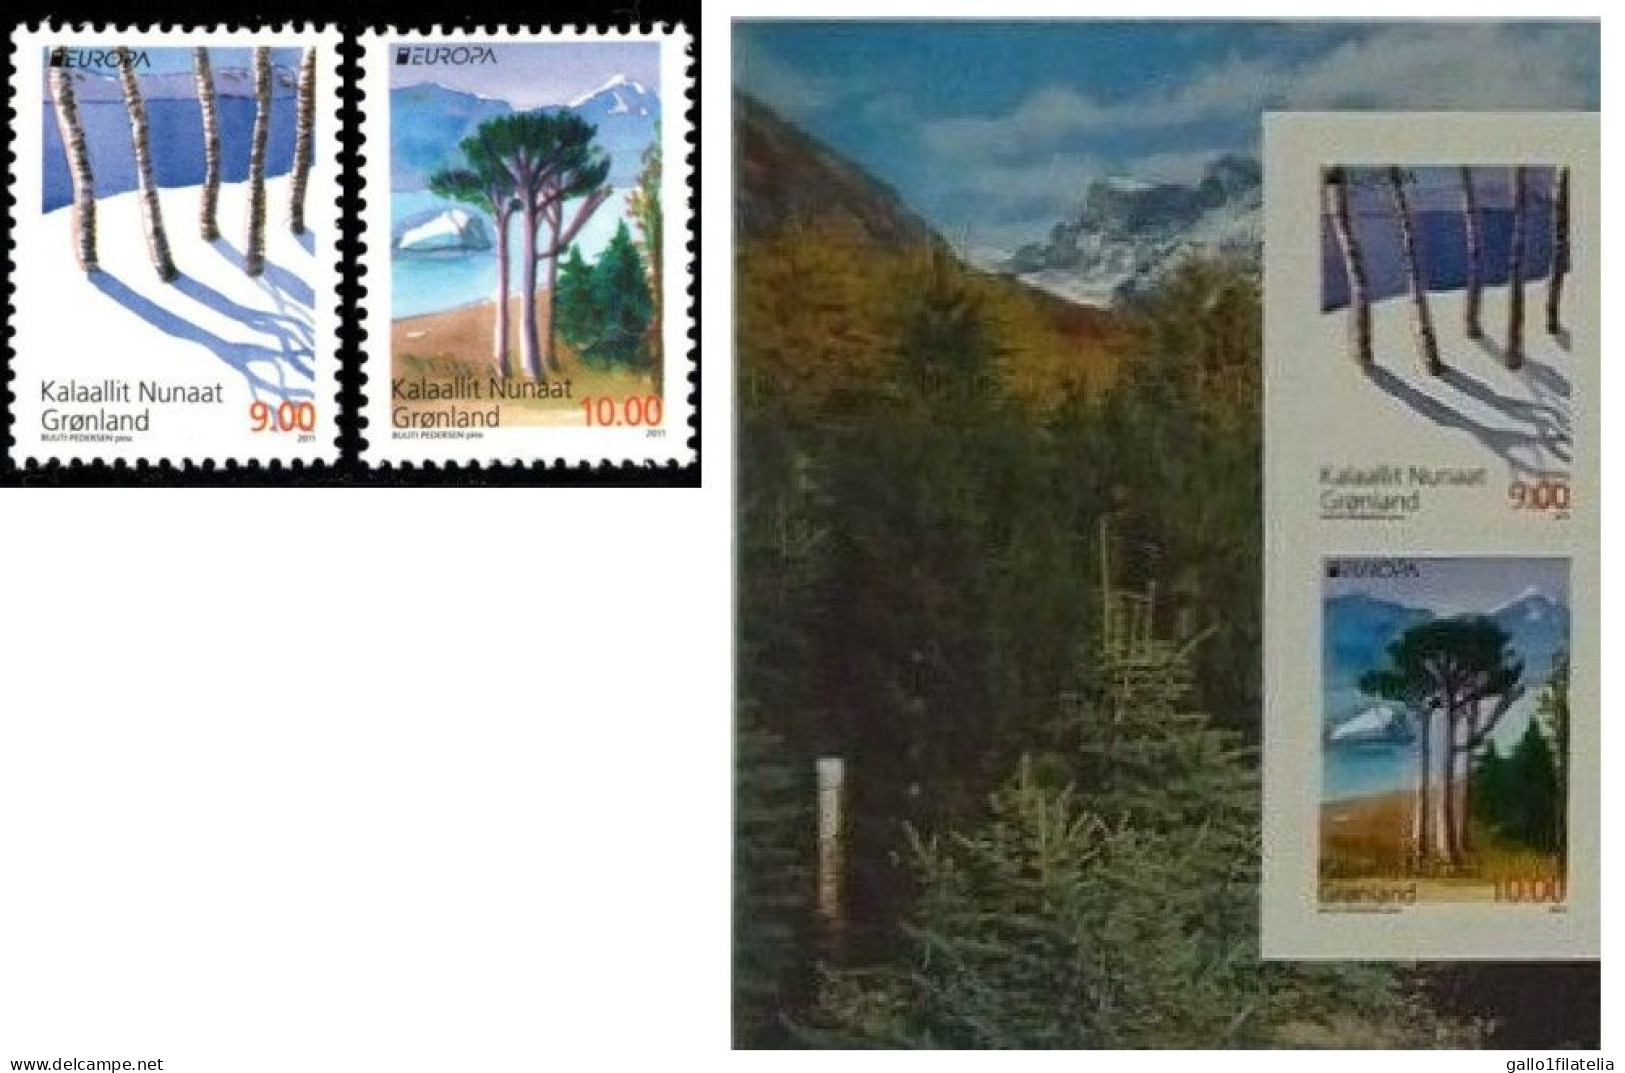 2011 - GROENLANDIA / GREENLAND - EUROPA  CEPT- LE FORESTE / THE FORESTS. 2 STAMPS + 2 ADHESIVE STAMPS. MNH - 2011